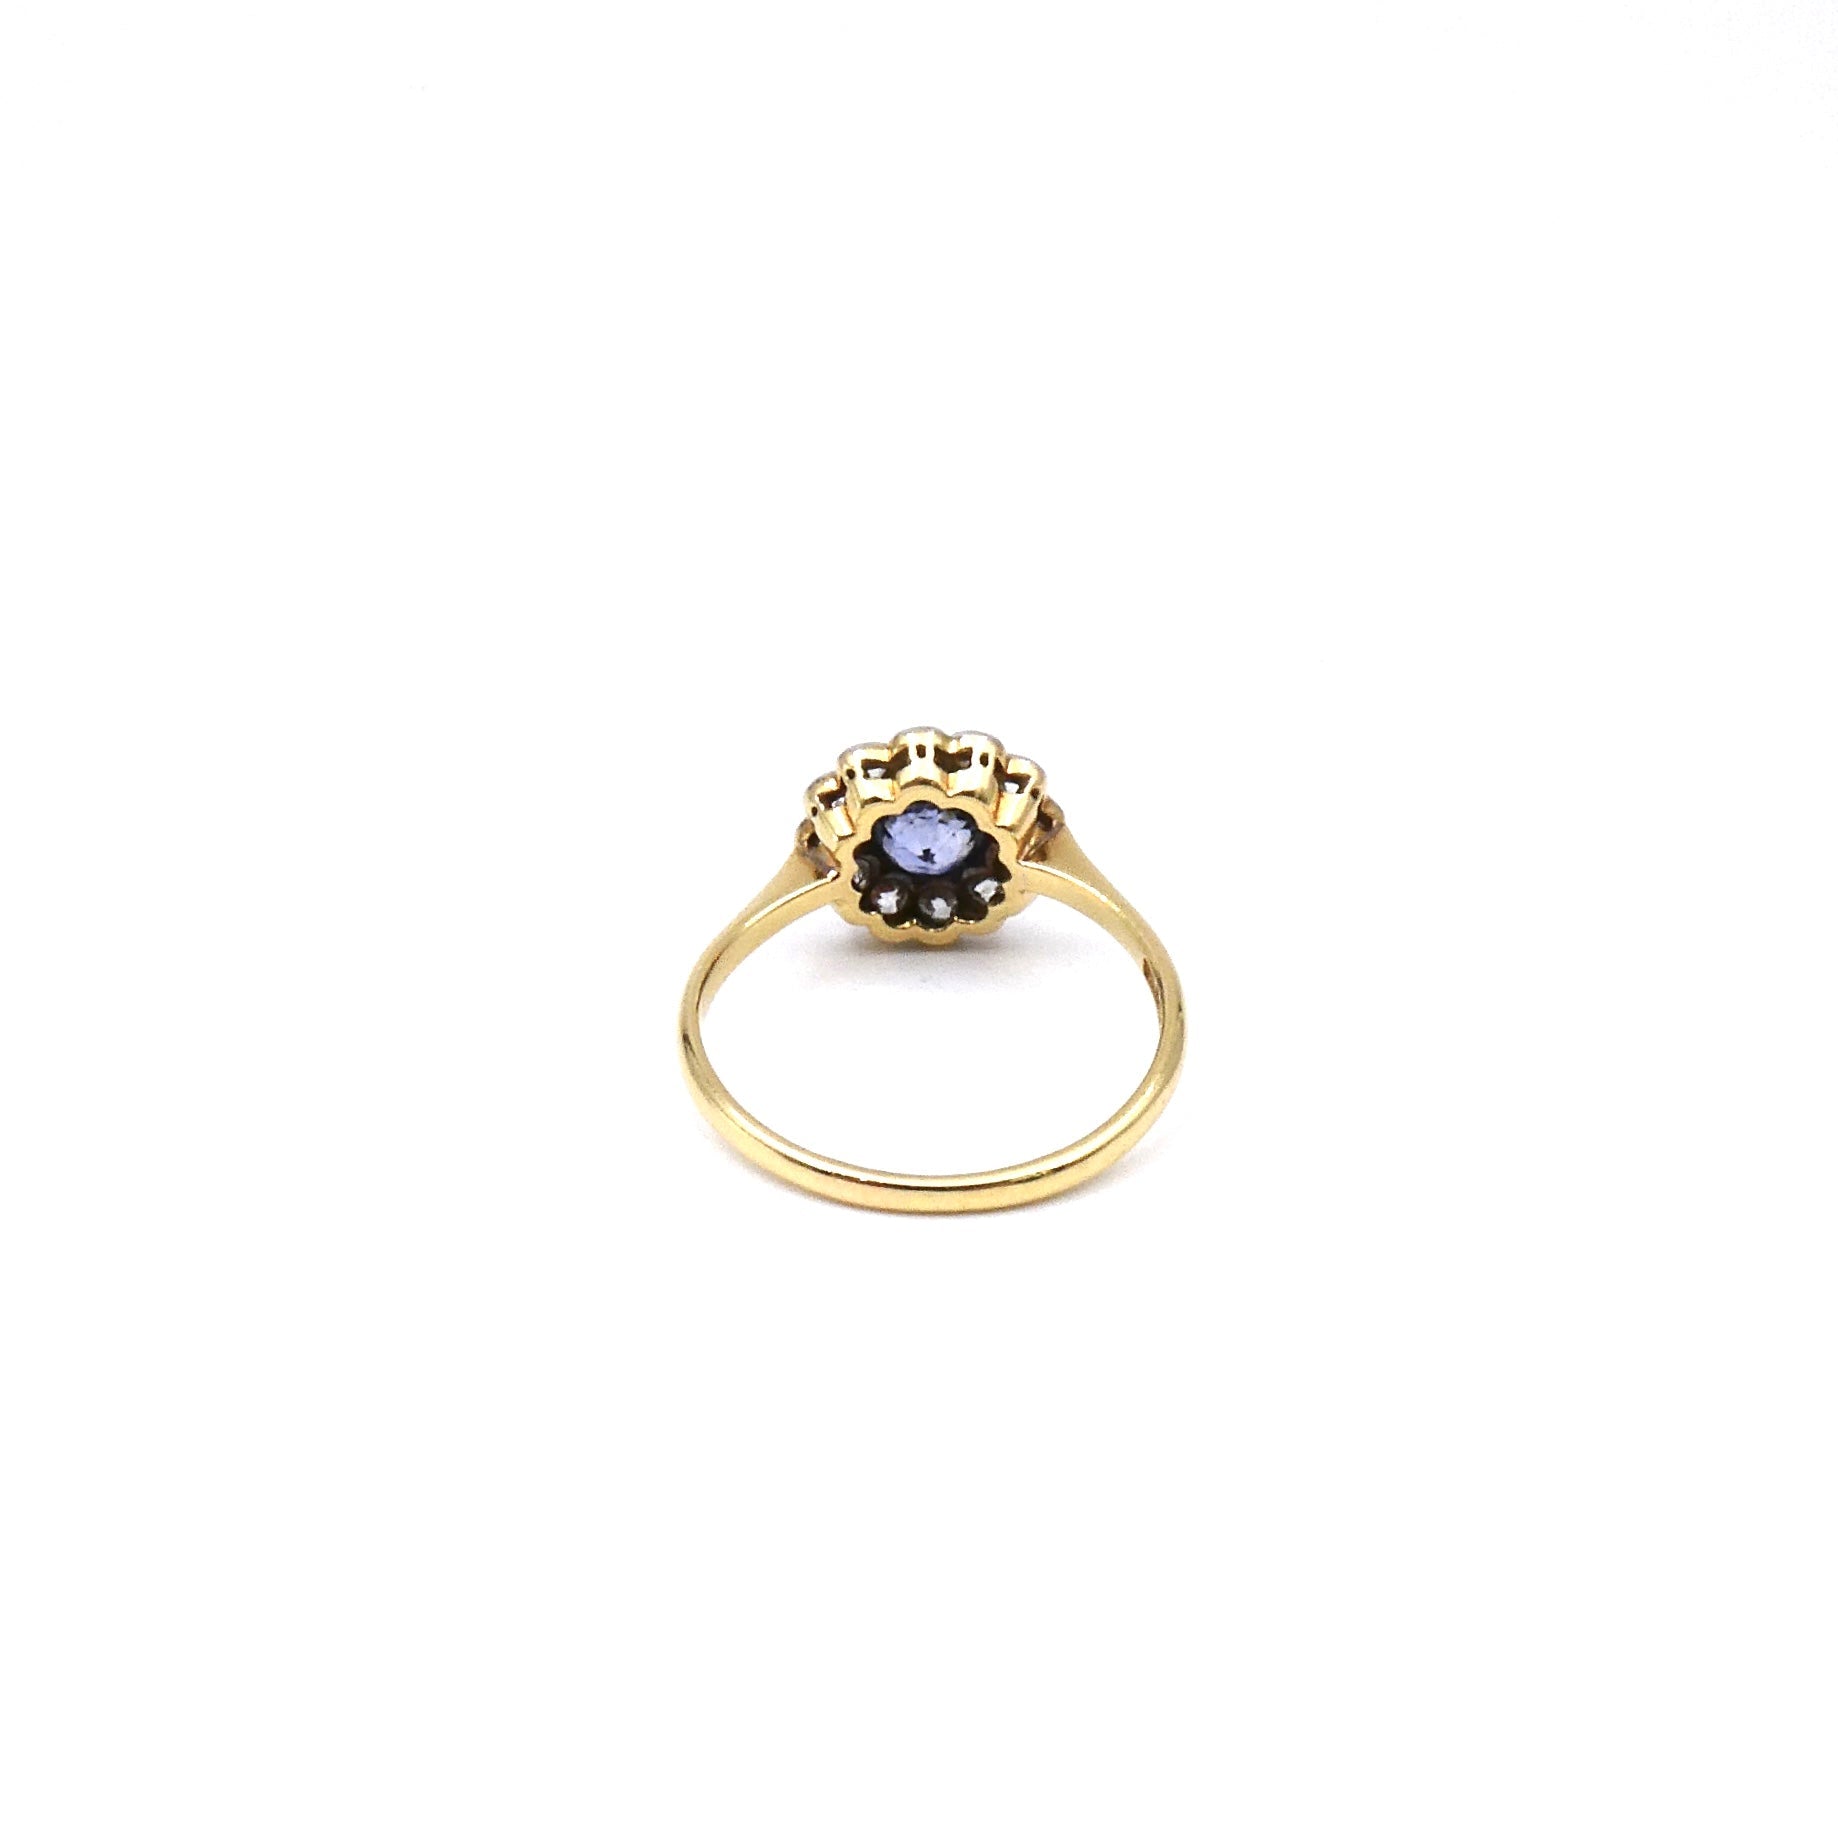 Antique sapphire daisy ring, 18kt cluster sapphire ring with old european cut diamonds and a sapphire. - Collected